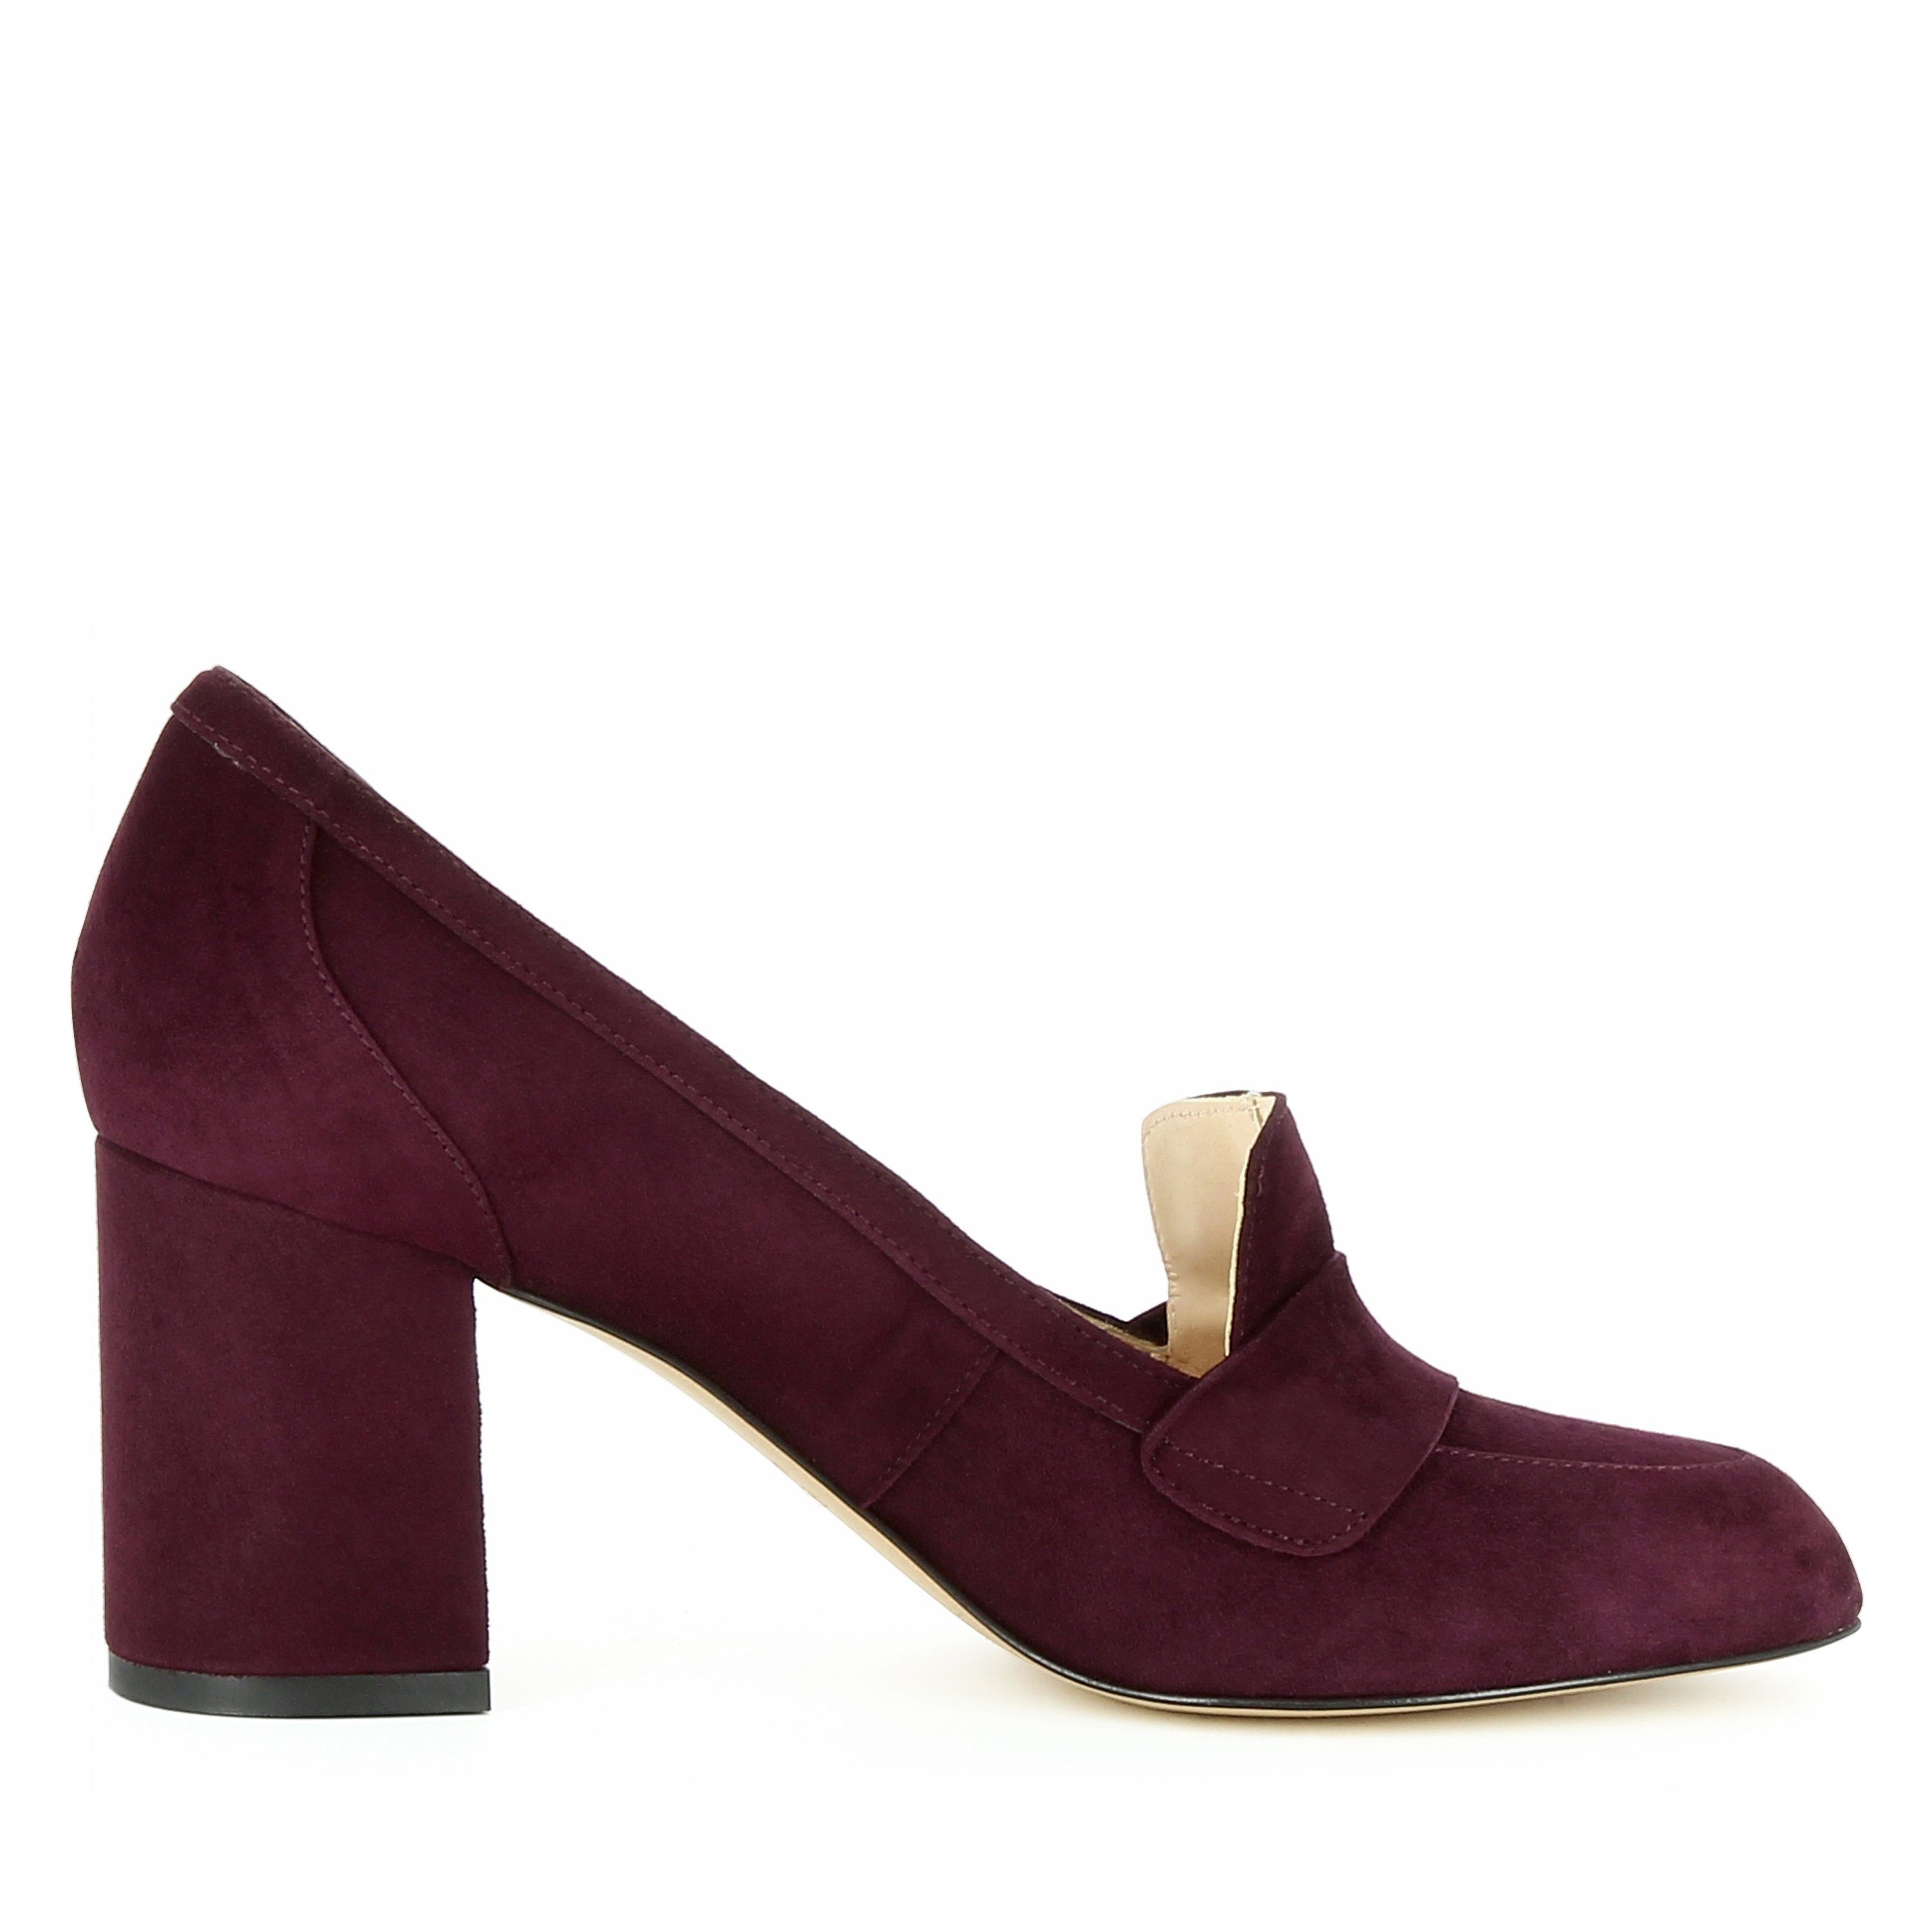 Evita NELLY Italy Handmade bordeaux Pumps in